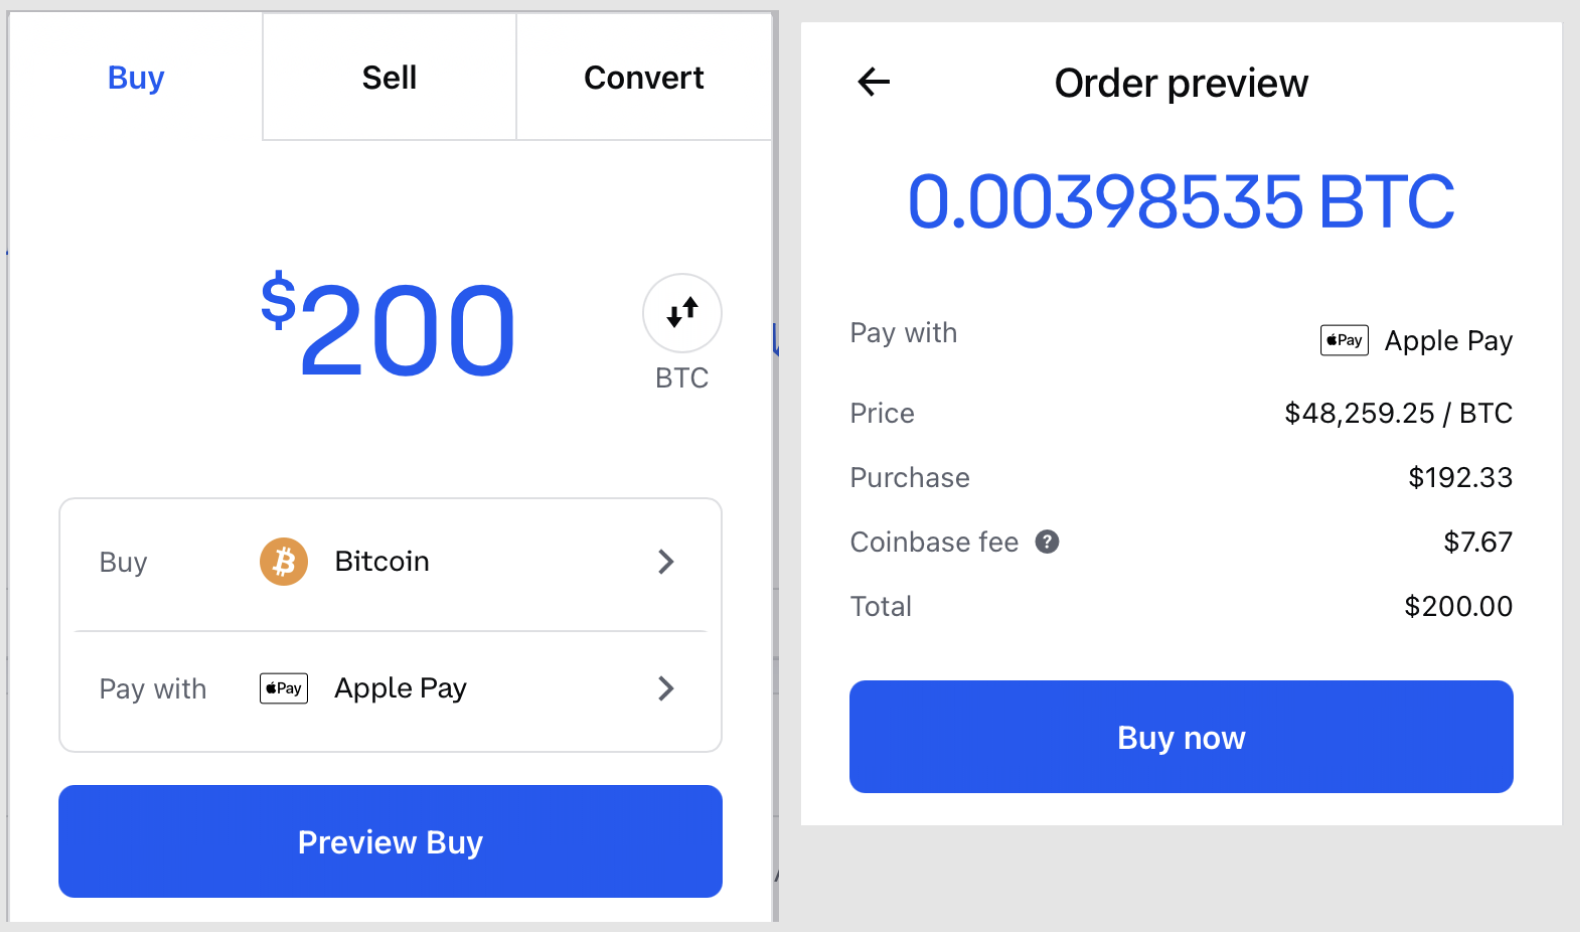 you are currently unable to buy and sell crypto coinbase